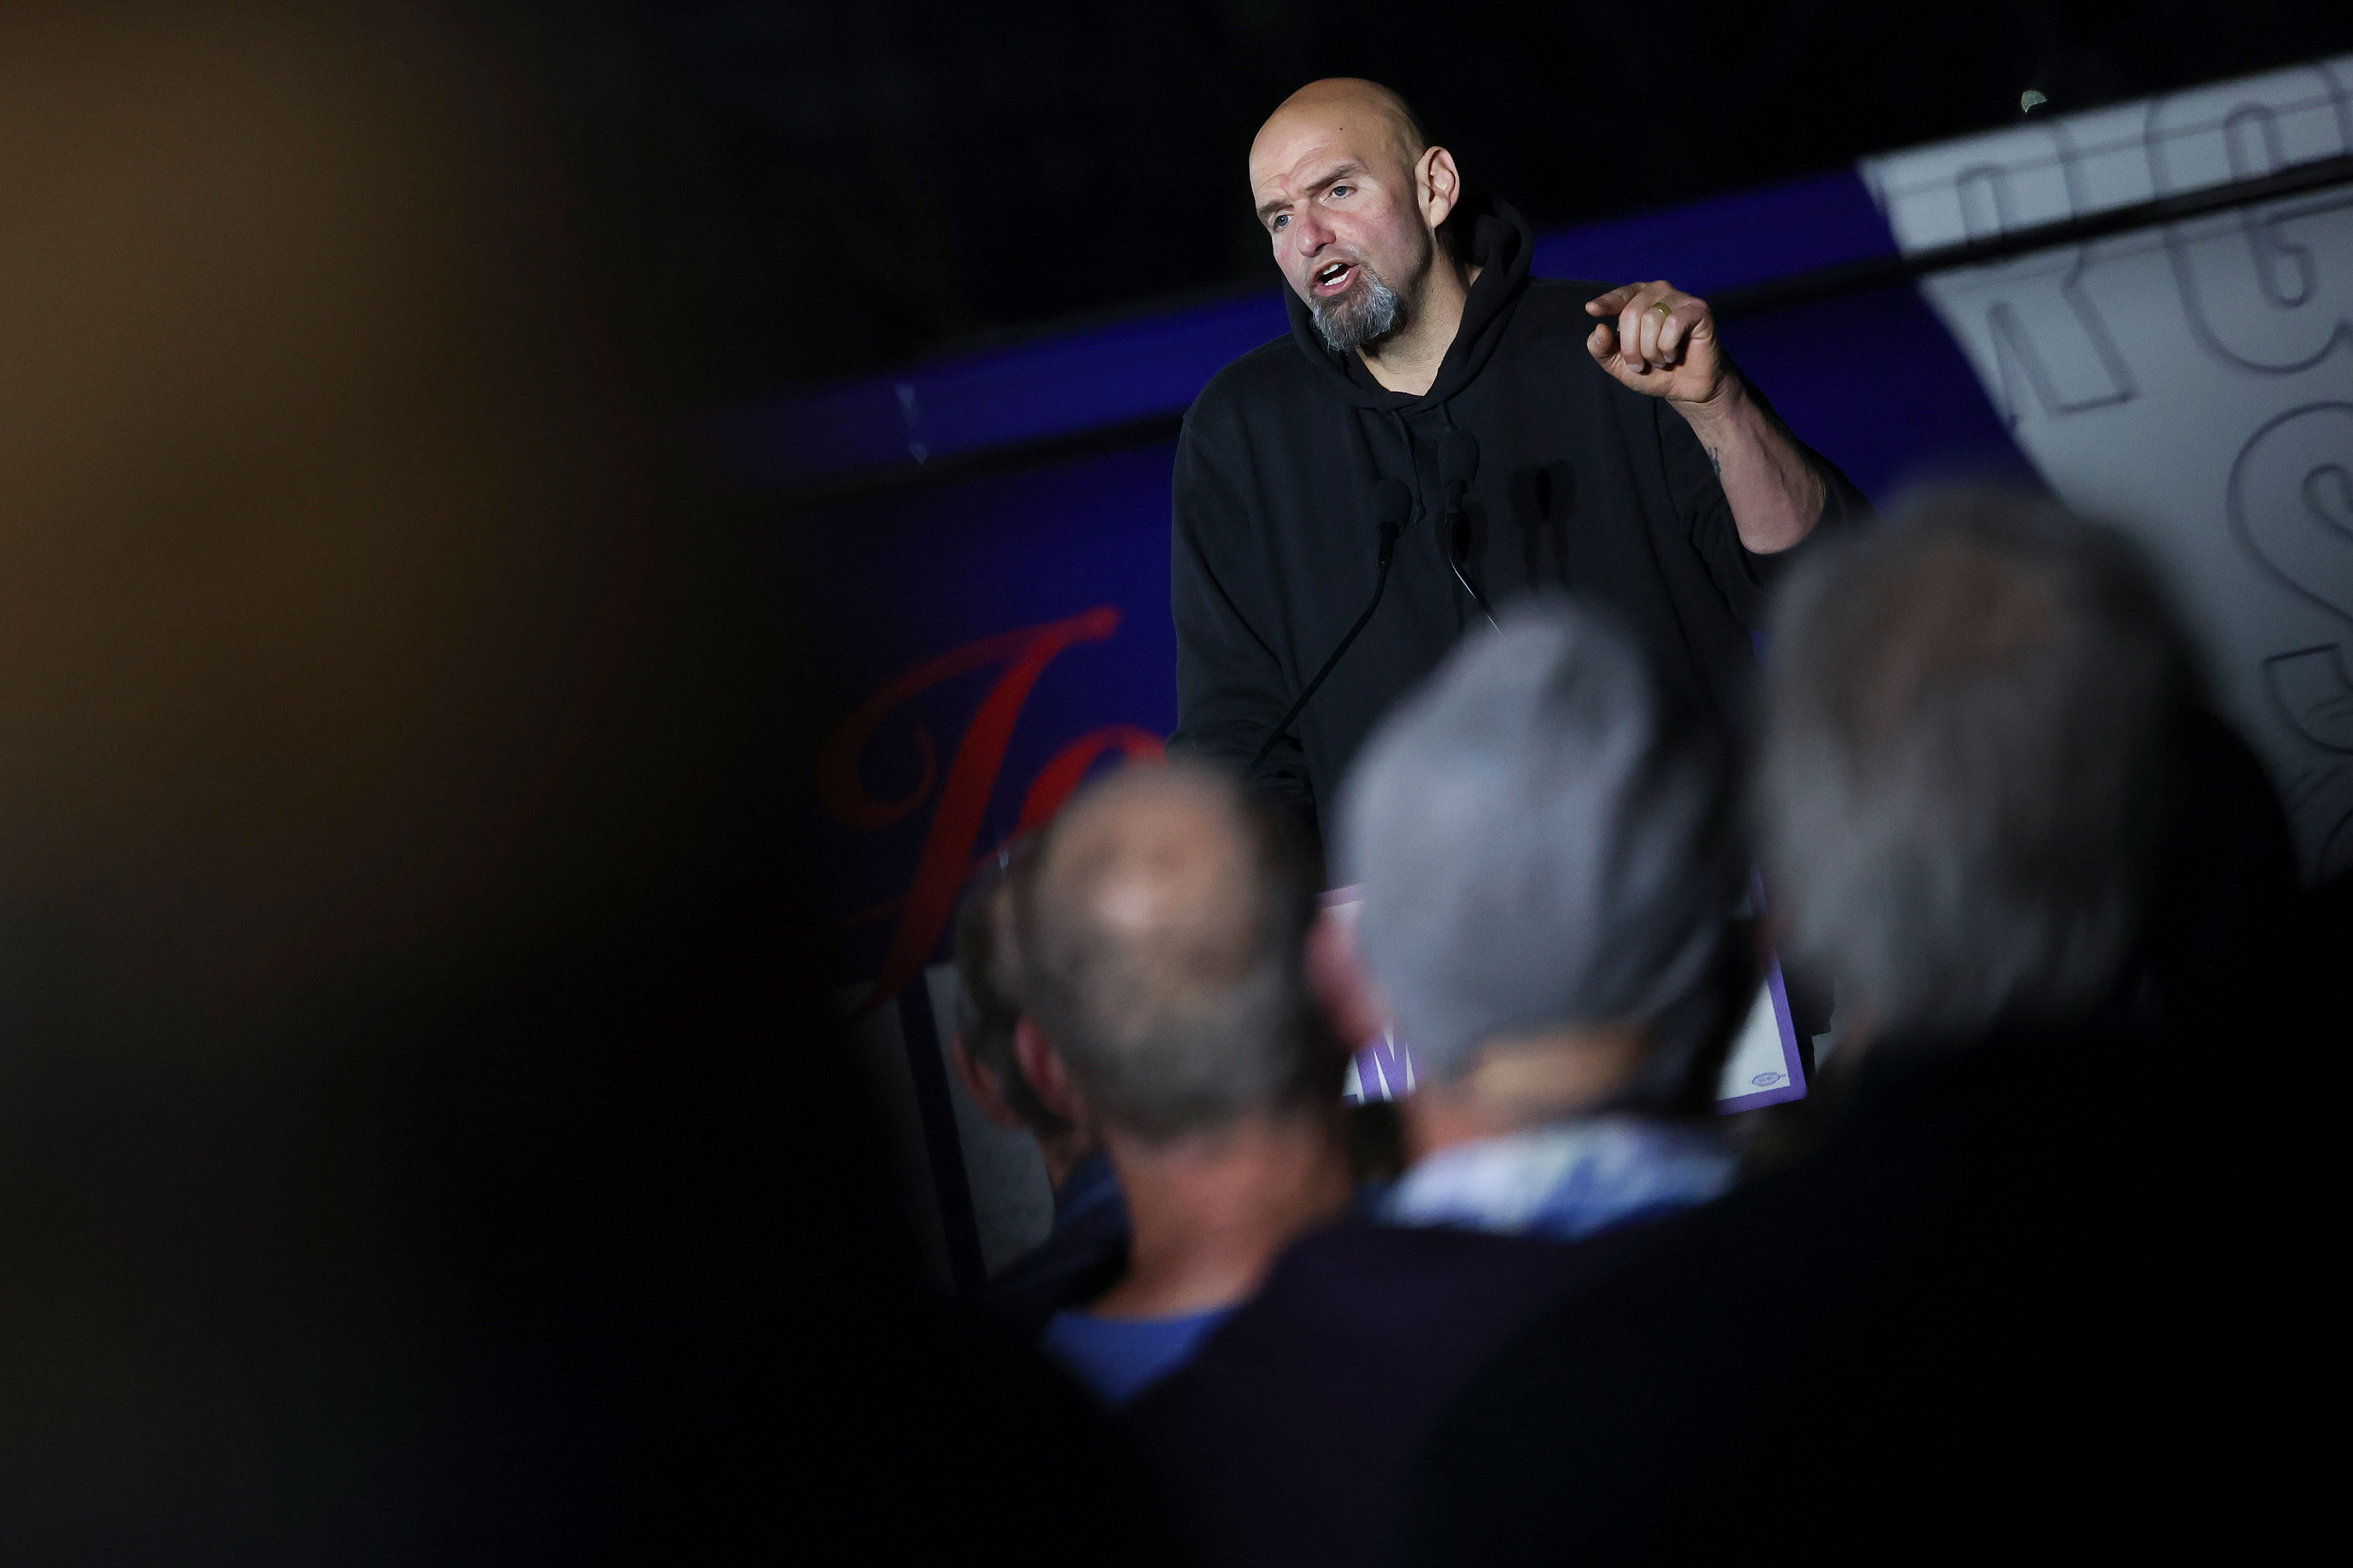 Then-Senate candidate John Fetterman campaigns during a rally in November 2022.